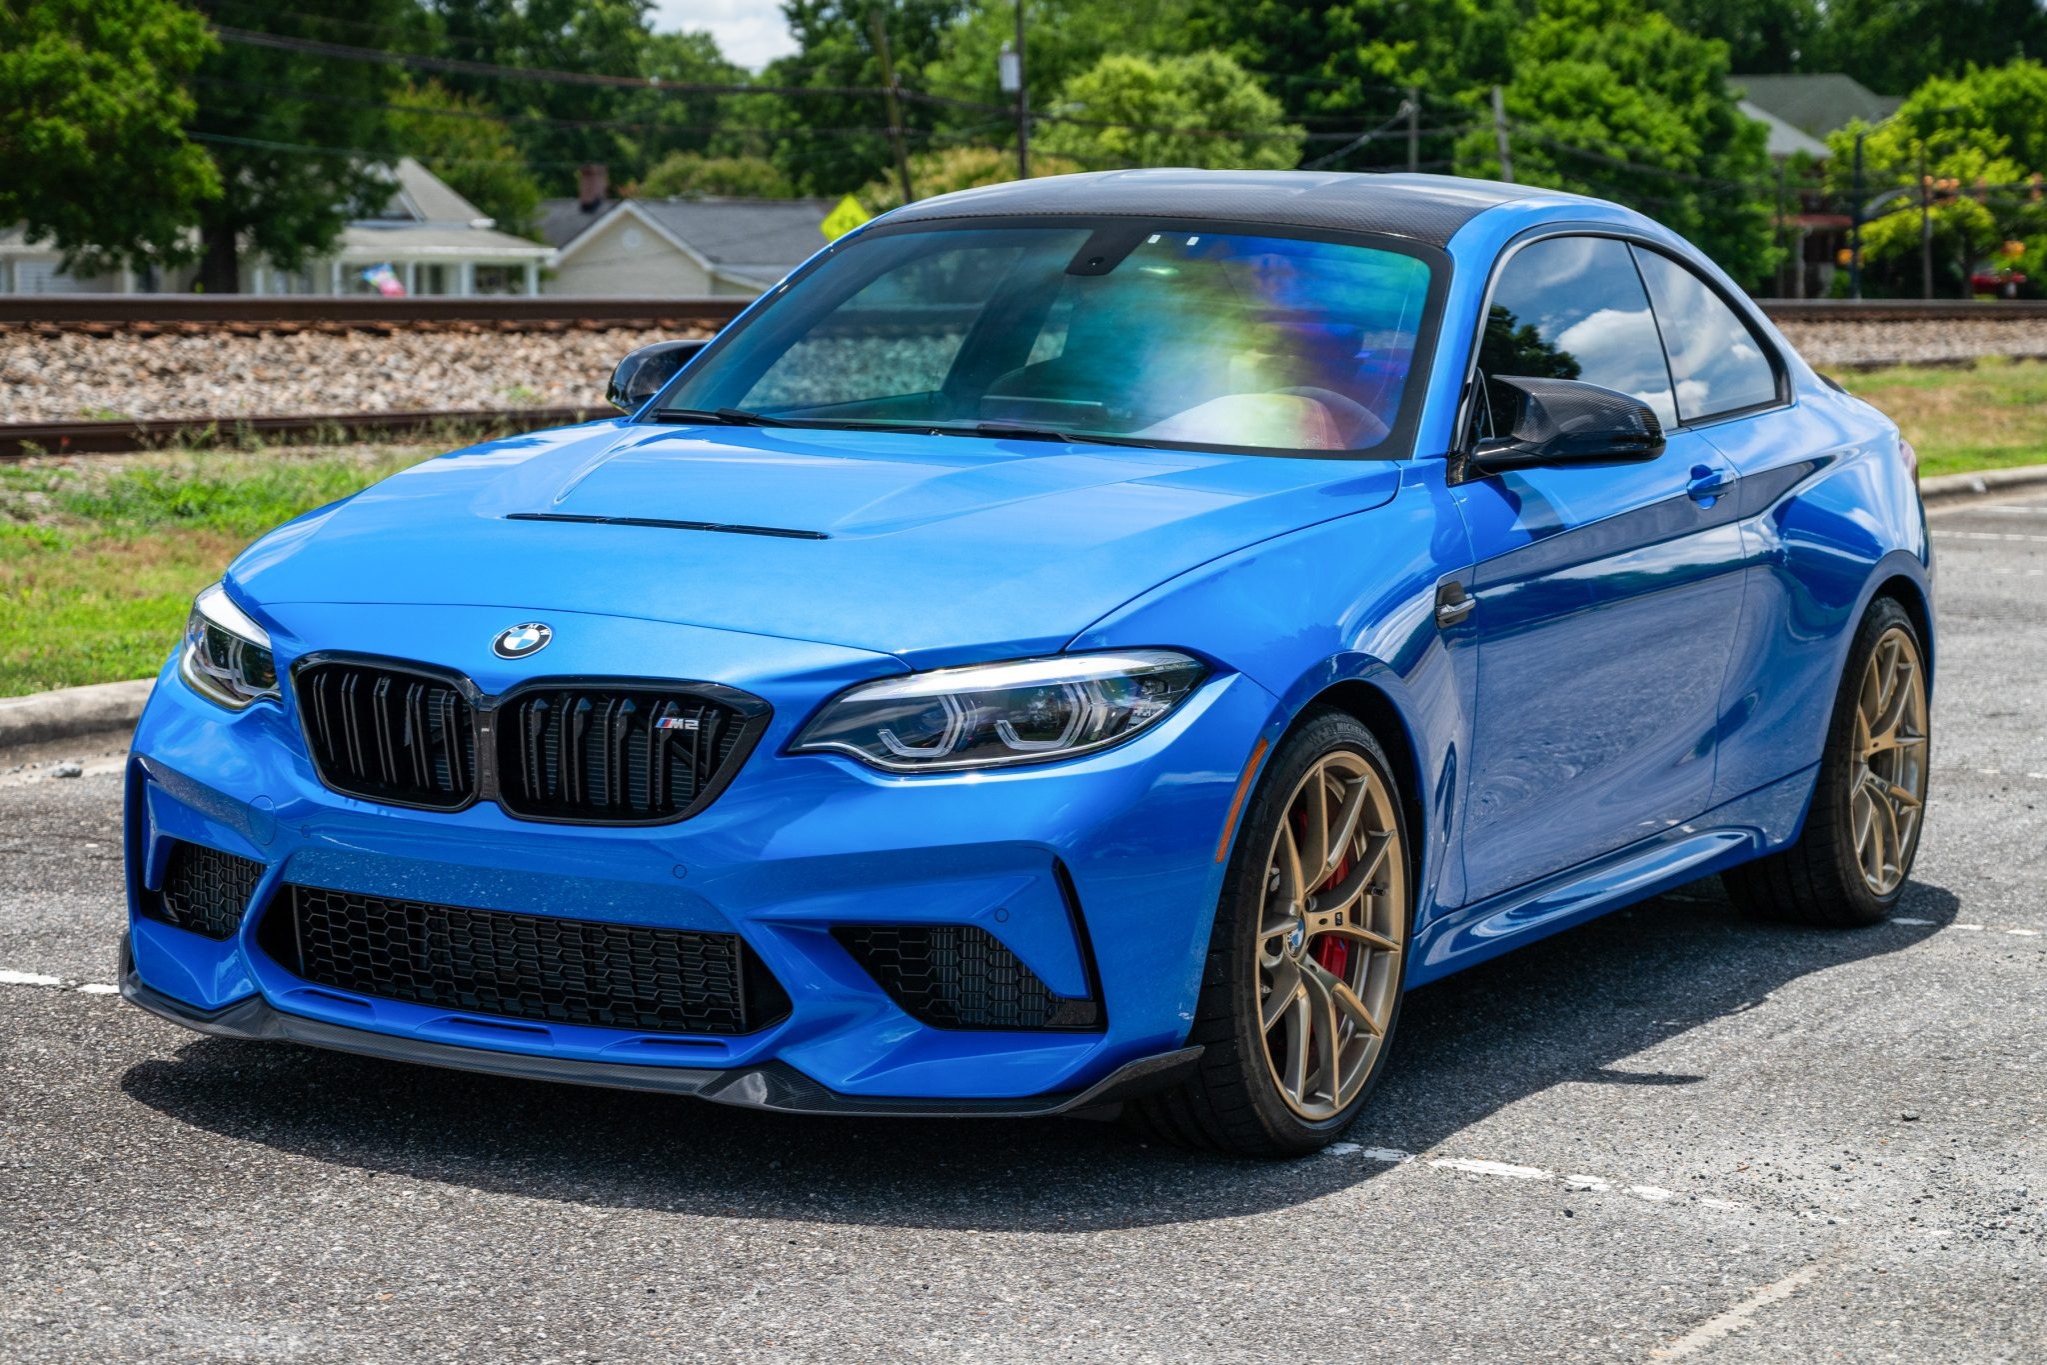 Used 1,400-Mile 2020 BMW M2 CS 6-Speed Review